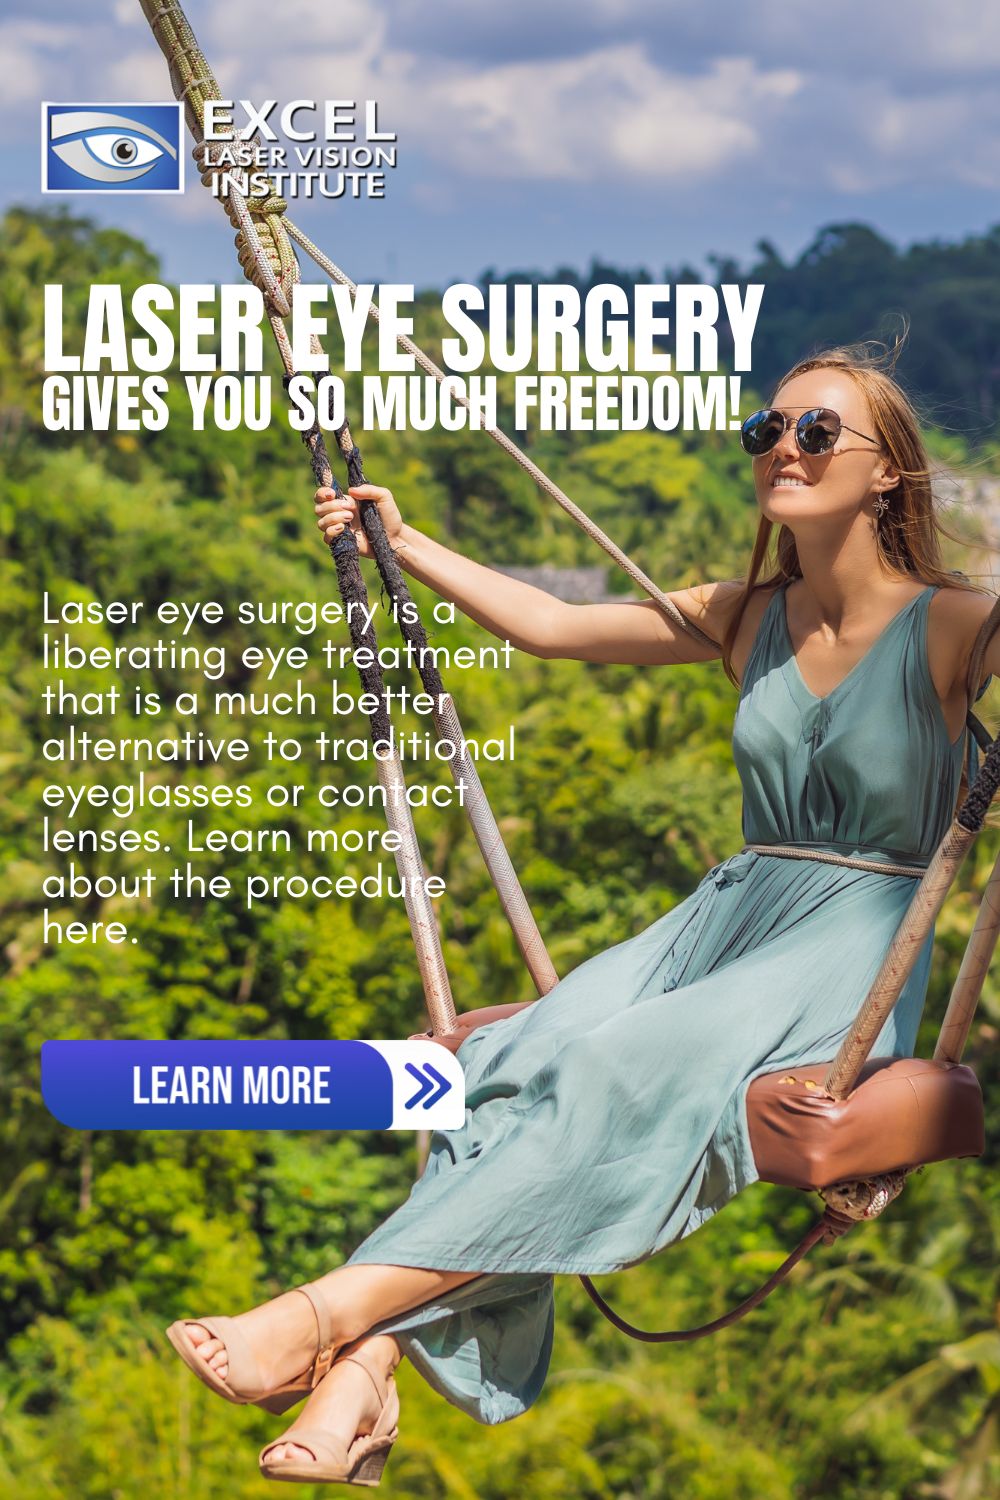 woman-in-a-swing-showing-freedom-blog-title-on-the-side-Laser-Eye-Surgery-Gives-You-So-Much-Freedom-Pinterest-Pin